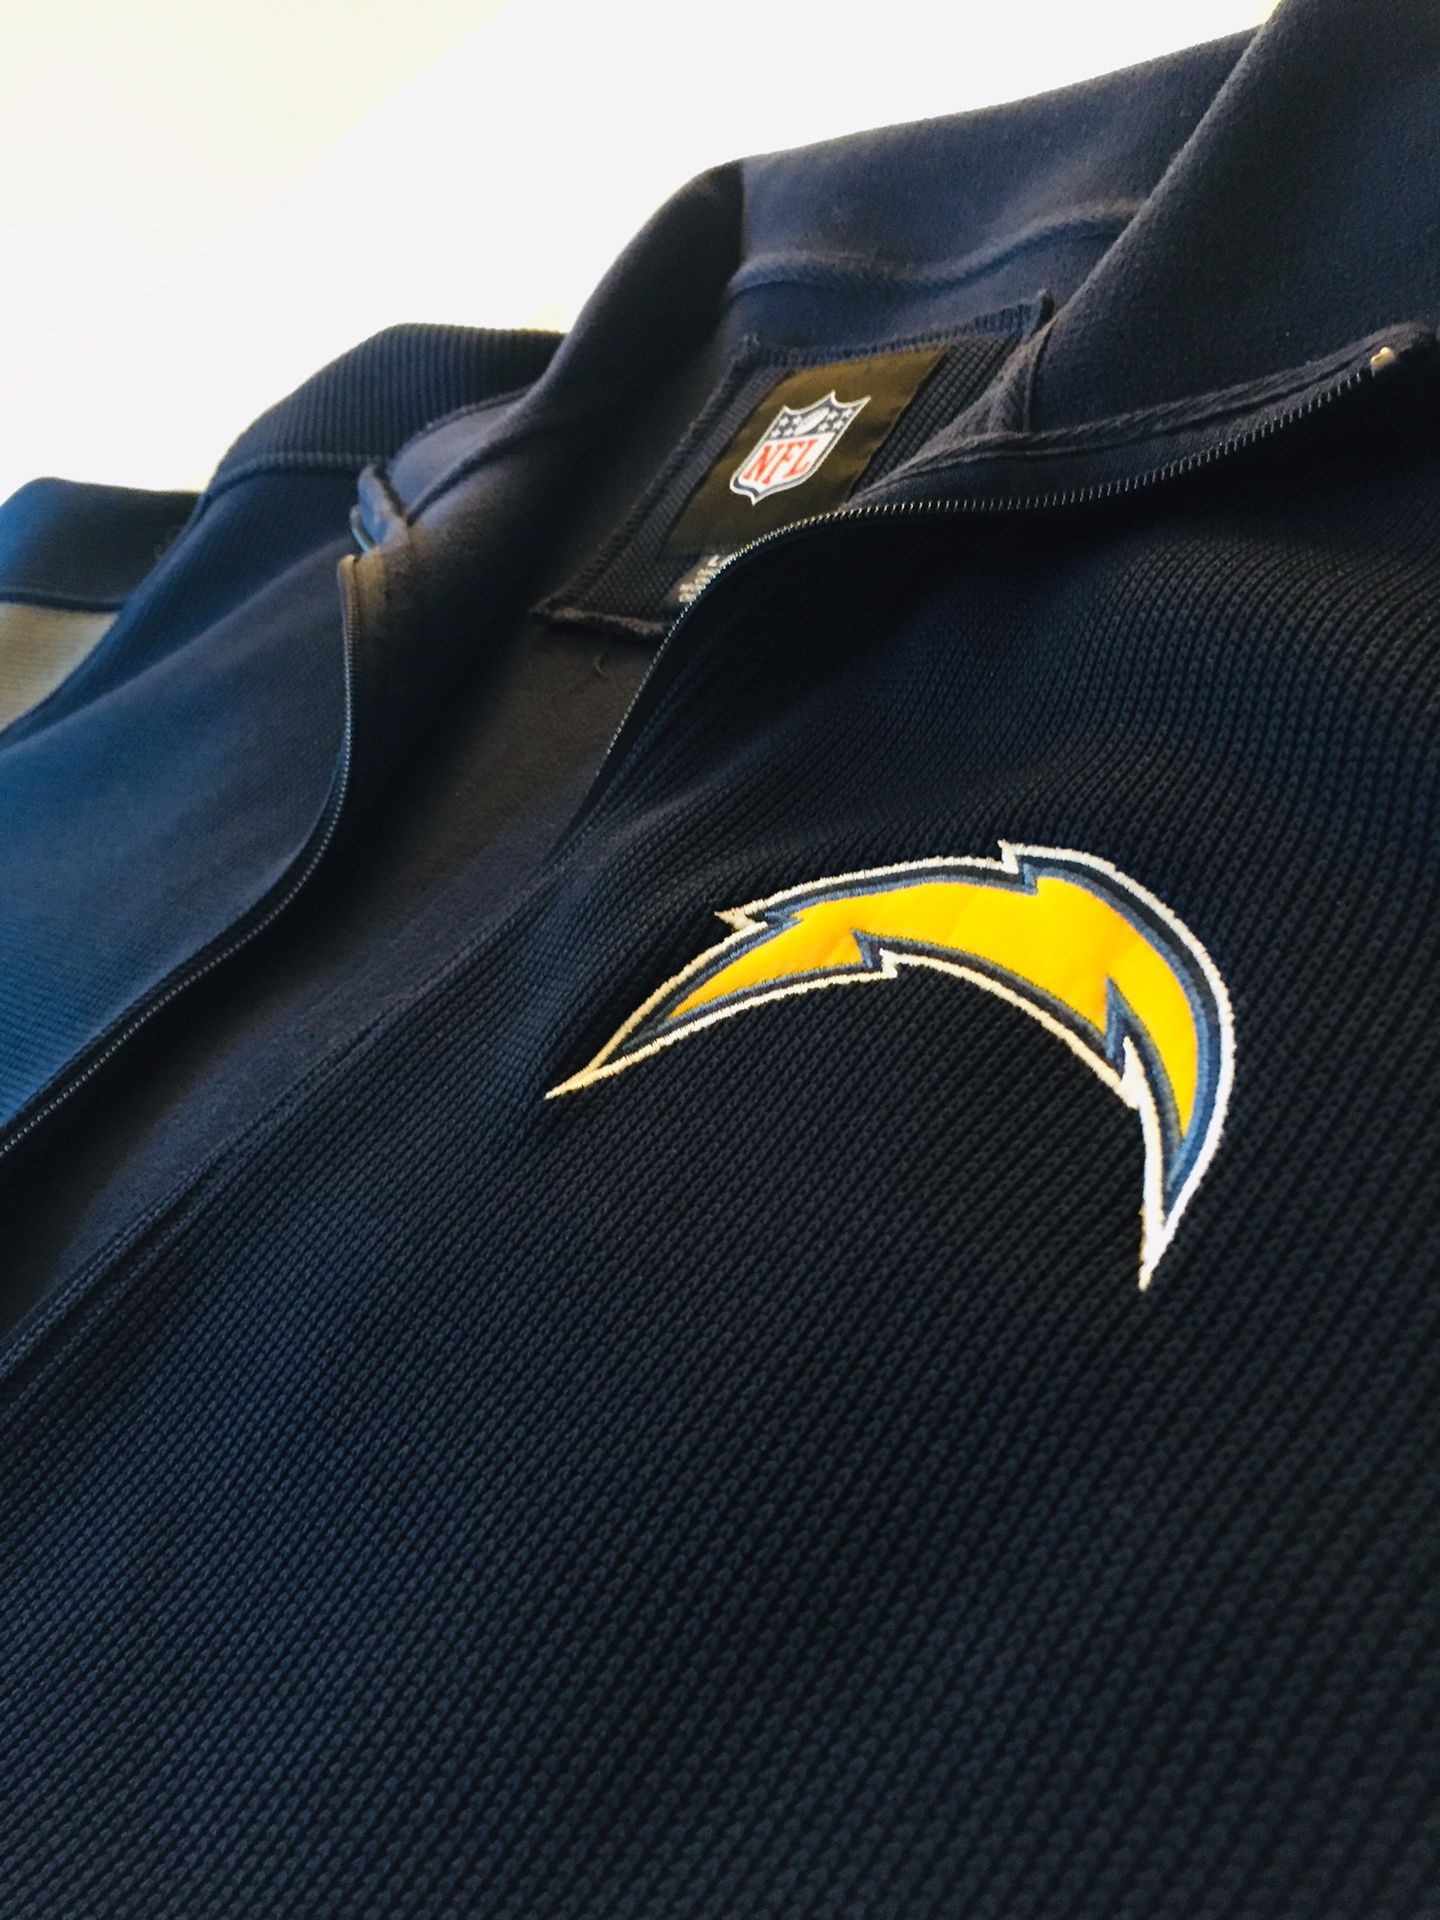 Chargers Jacket